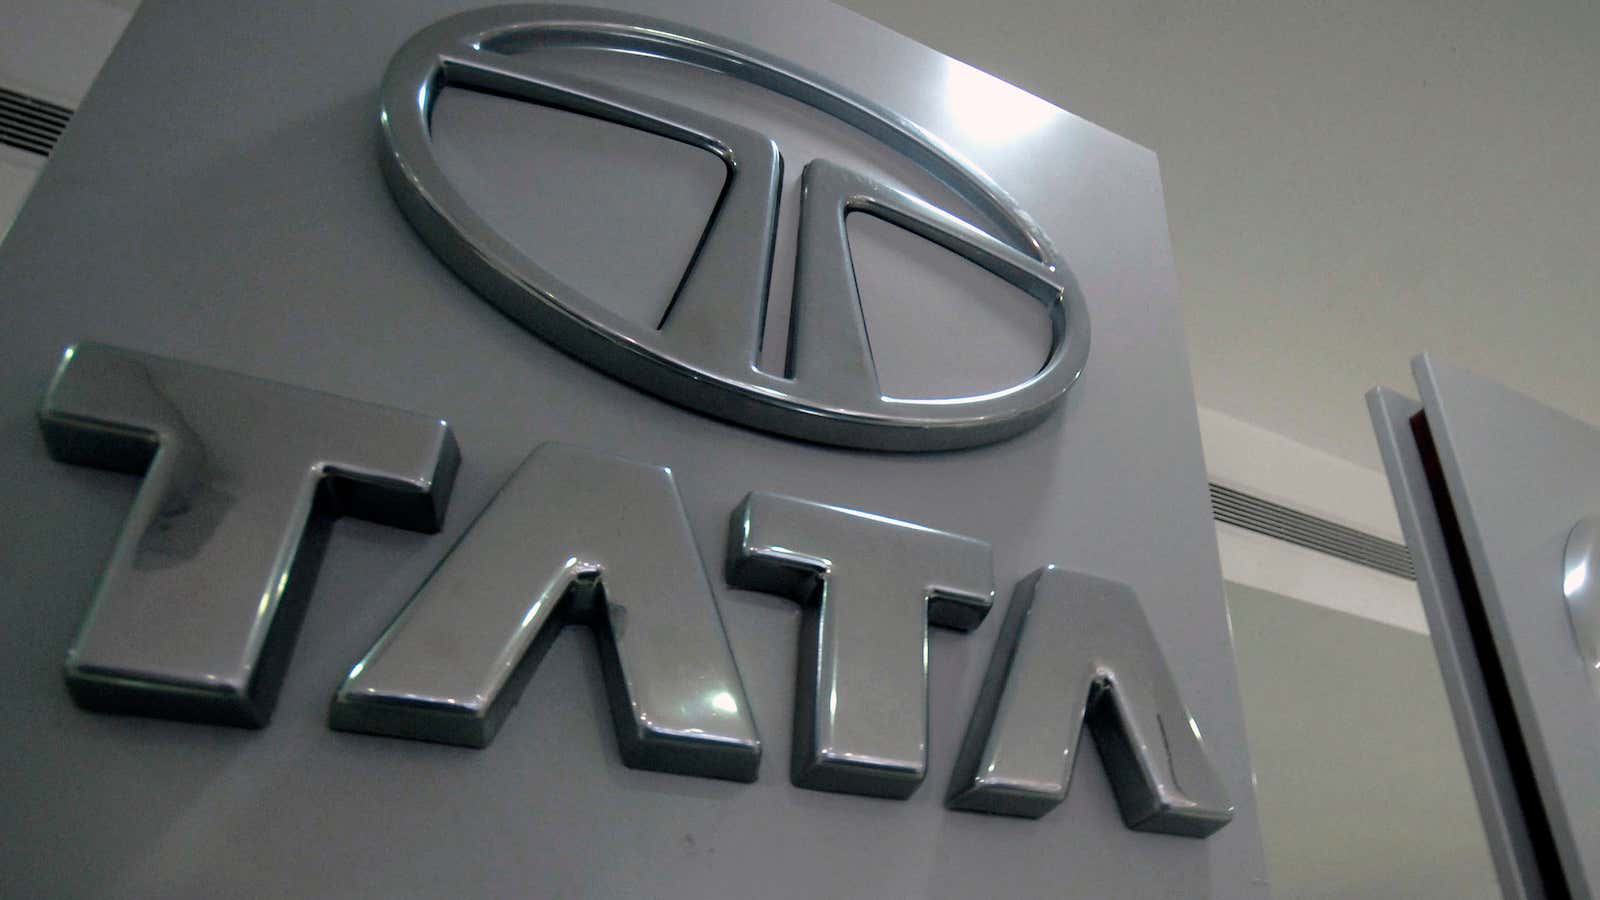 Tata’s name is going nowhere, but its new Zica brand is in for a change.